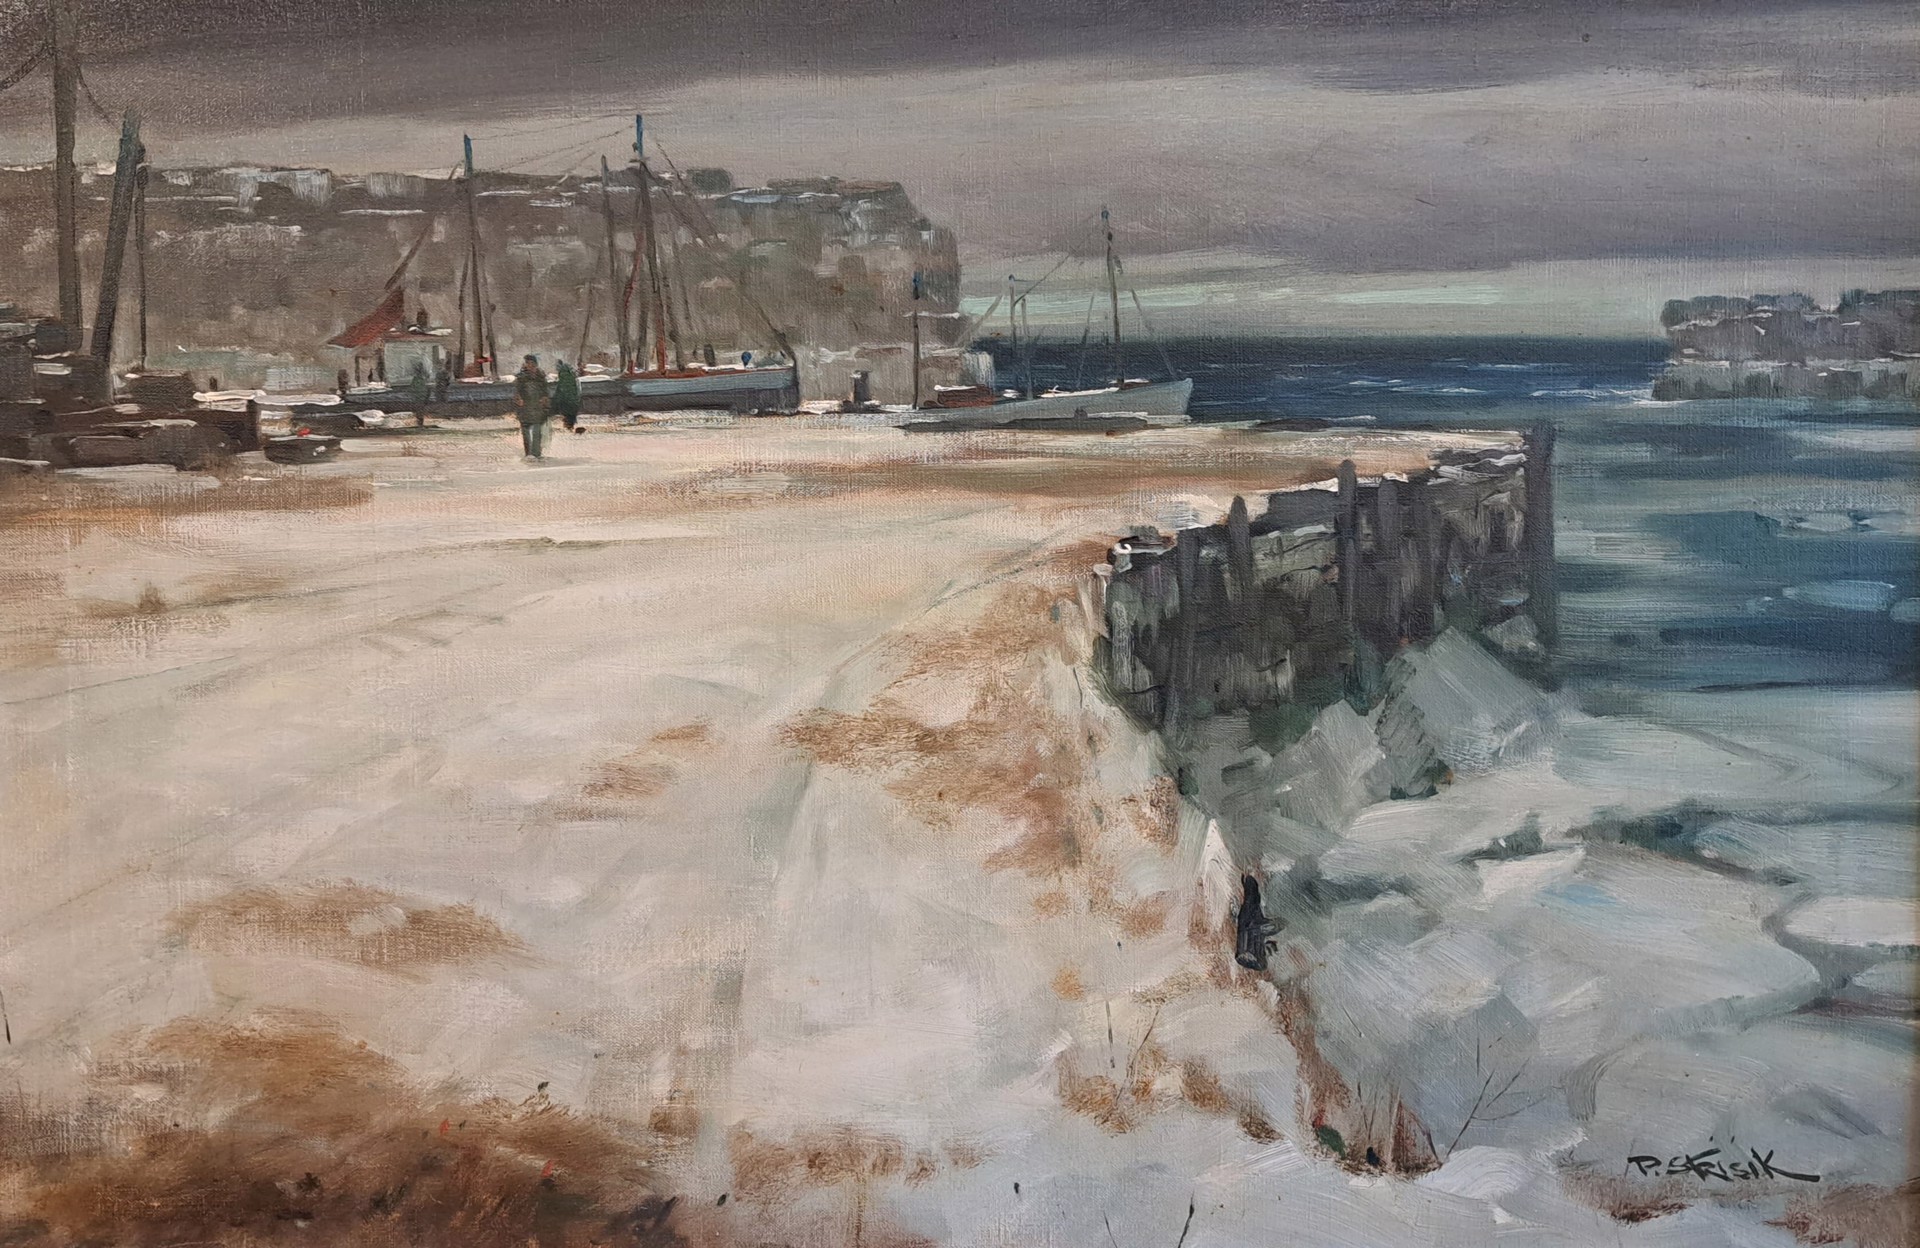 Lanes Cove by Paul Strisik (1918-1998)